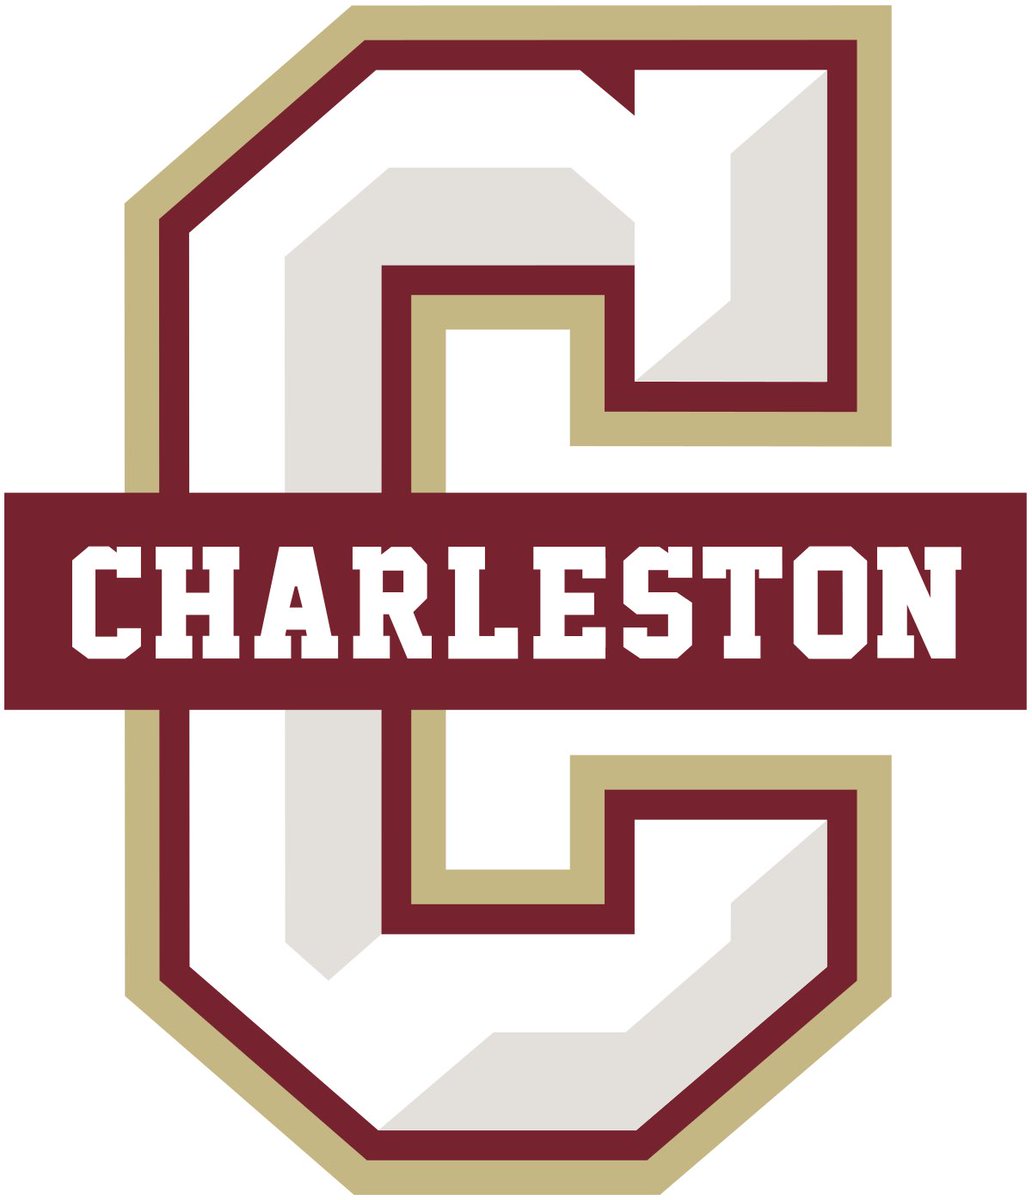 Blessed to recieve a Division 1 offer from The College of Charleston #ᴀɢᴛɢ